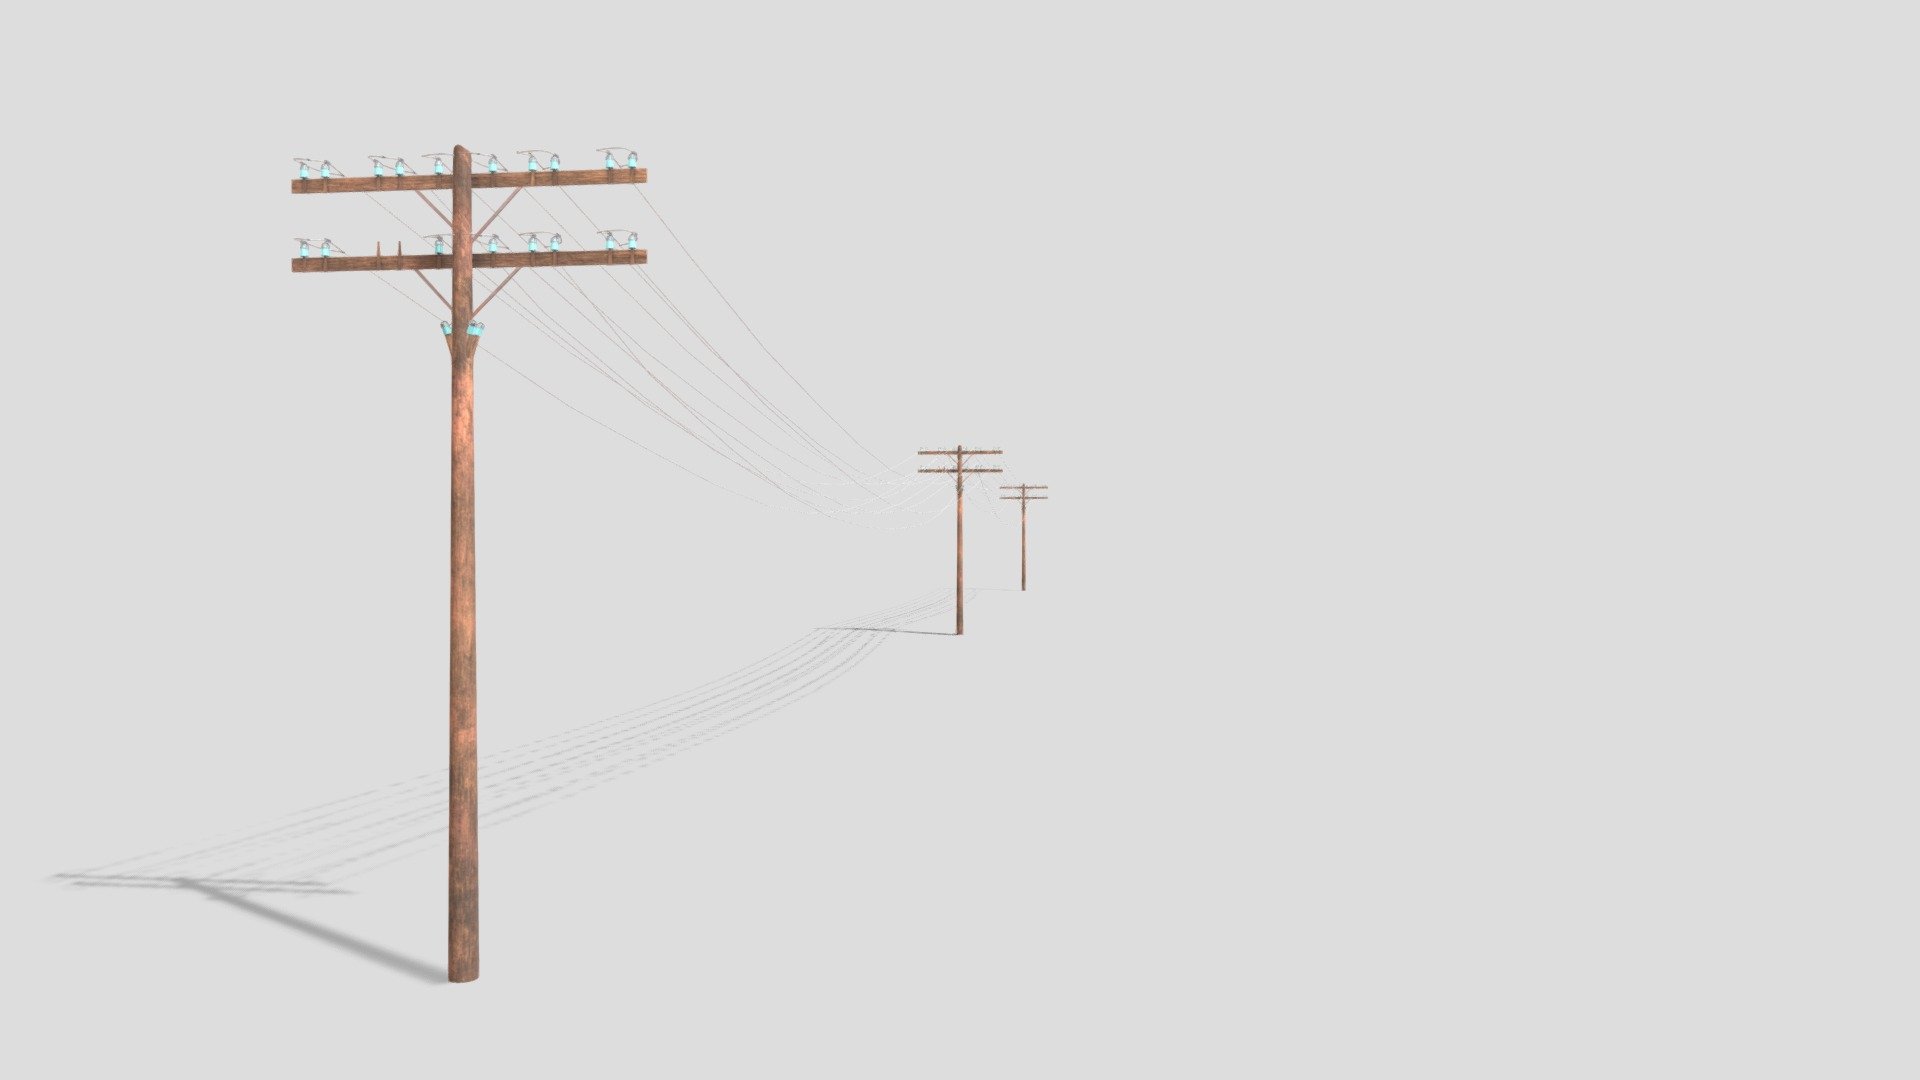 Electricity poles model built in Blender and rendered with Cycles, with PBR materials, Game-Ready.
The setup is built of 3 poles with cables between, ideal for seting up arrays.

File formats:
-.blend, rendered with cycles, as seen in the images;
-.obj, with materials applied and textures;
-.dae, with materials applied and textures;
-.fbx, with material slots applied;
-.stl;

3D Software:
This 3d model was originally created in Blender 2.79 and rendered with Cycles.

Materials and textures:
Materials and textures made in Substance Painter (PBR Workflow).
The model has materials applied in all formats, and is ready to import and render .
The model comes with multiple png image textures.

Preview scenes:
The preview images are rendered in Blender using its built-in render engine &lsquo;Cycles'.
Note that the blend files come directly with the rendering scene included and the render command will generate the exact result as seen in previews 3d model